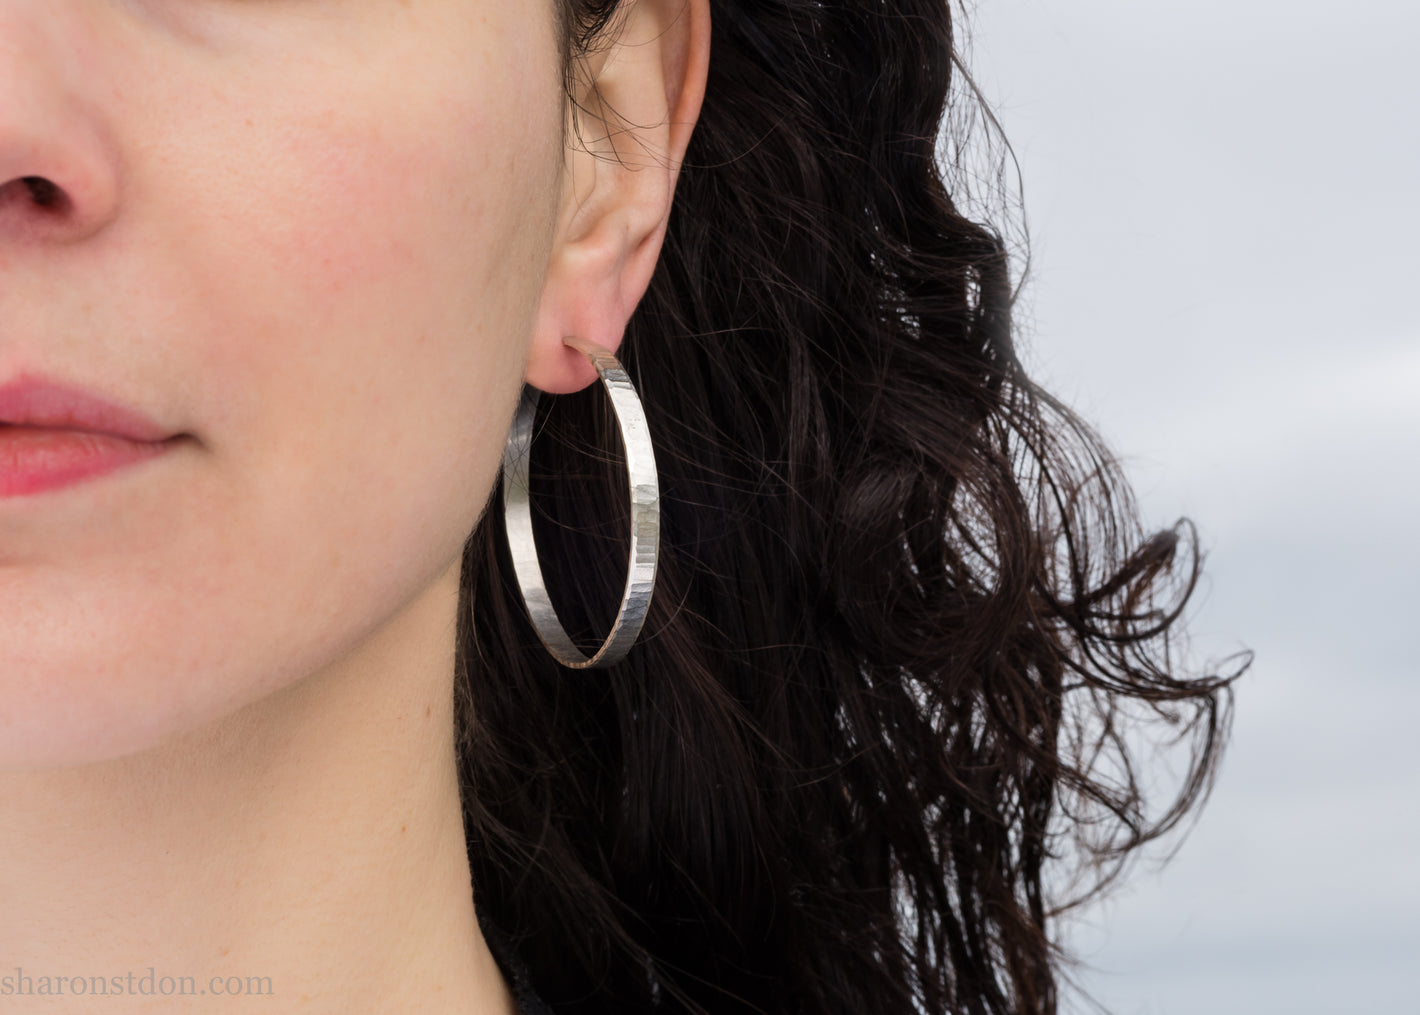 Handmade sterling silver hoop earrings. 50mm diameter, 5mm wide, with a hammered surface and brushed, matte, shiny finish.